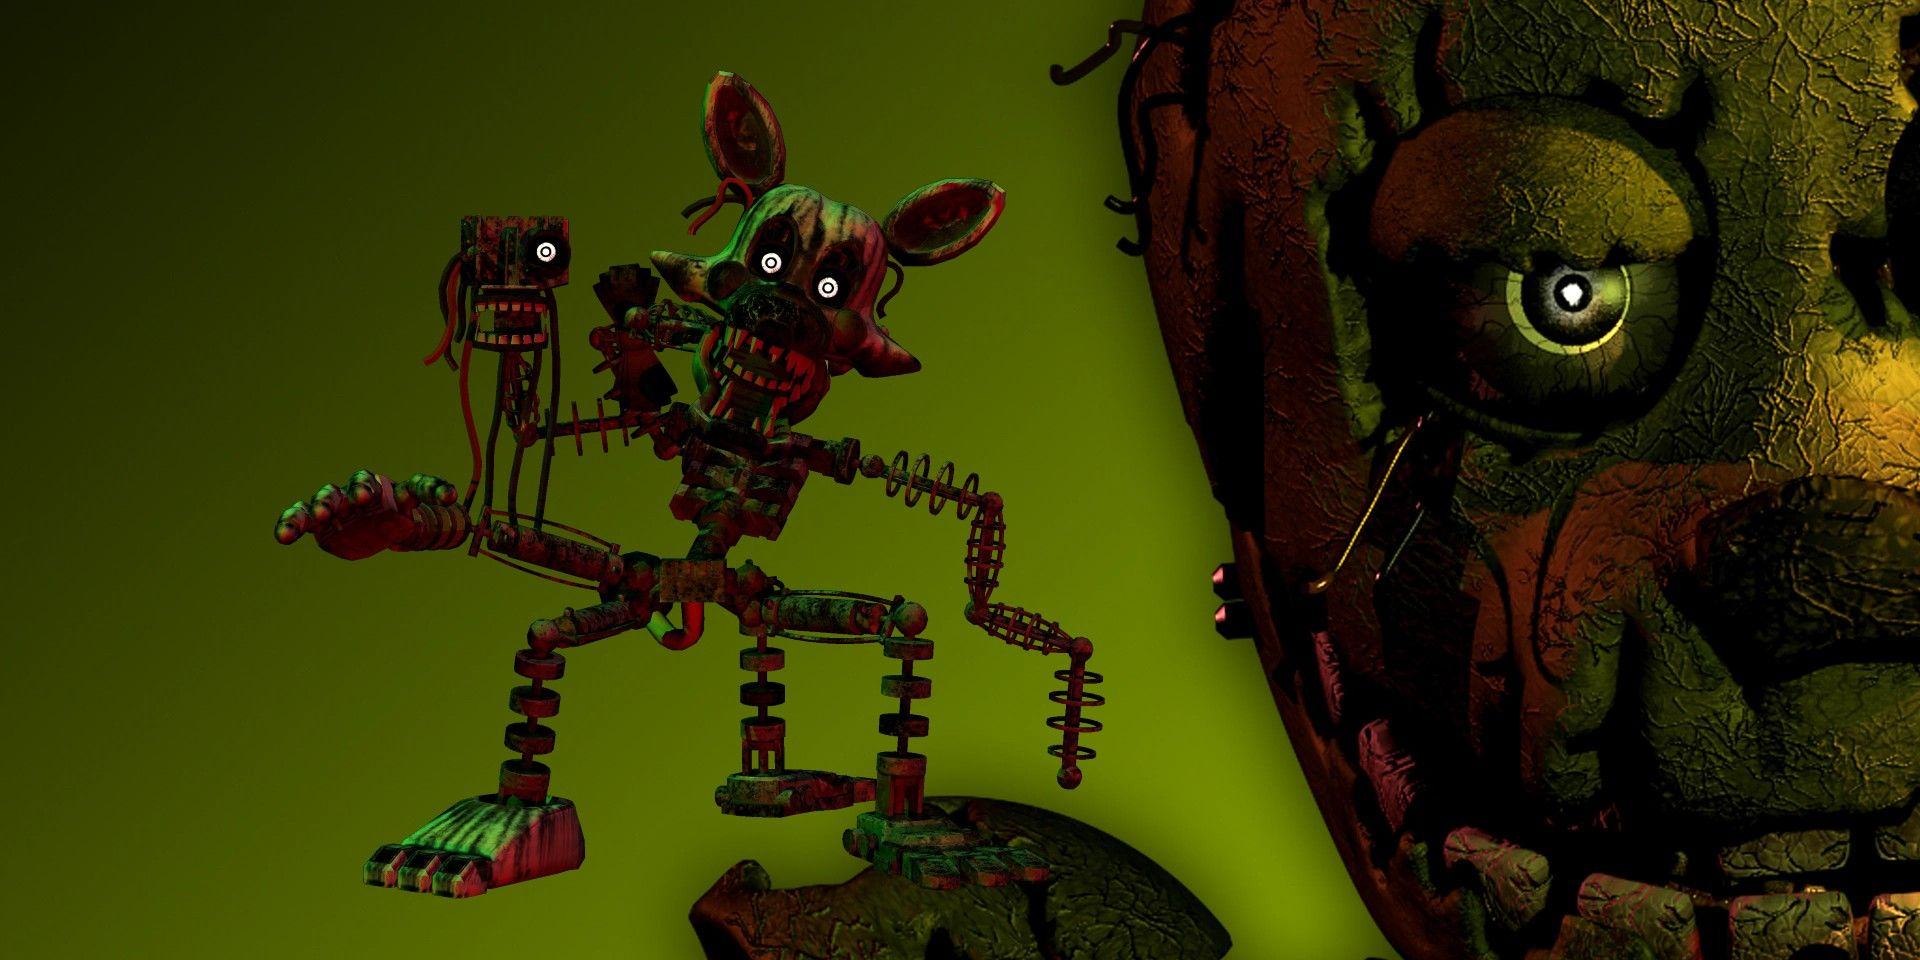 Synthesis of Phantom Mangle animation on the banner of Five Nights at Freddy's 3.